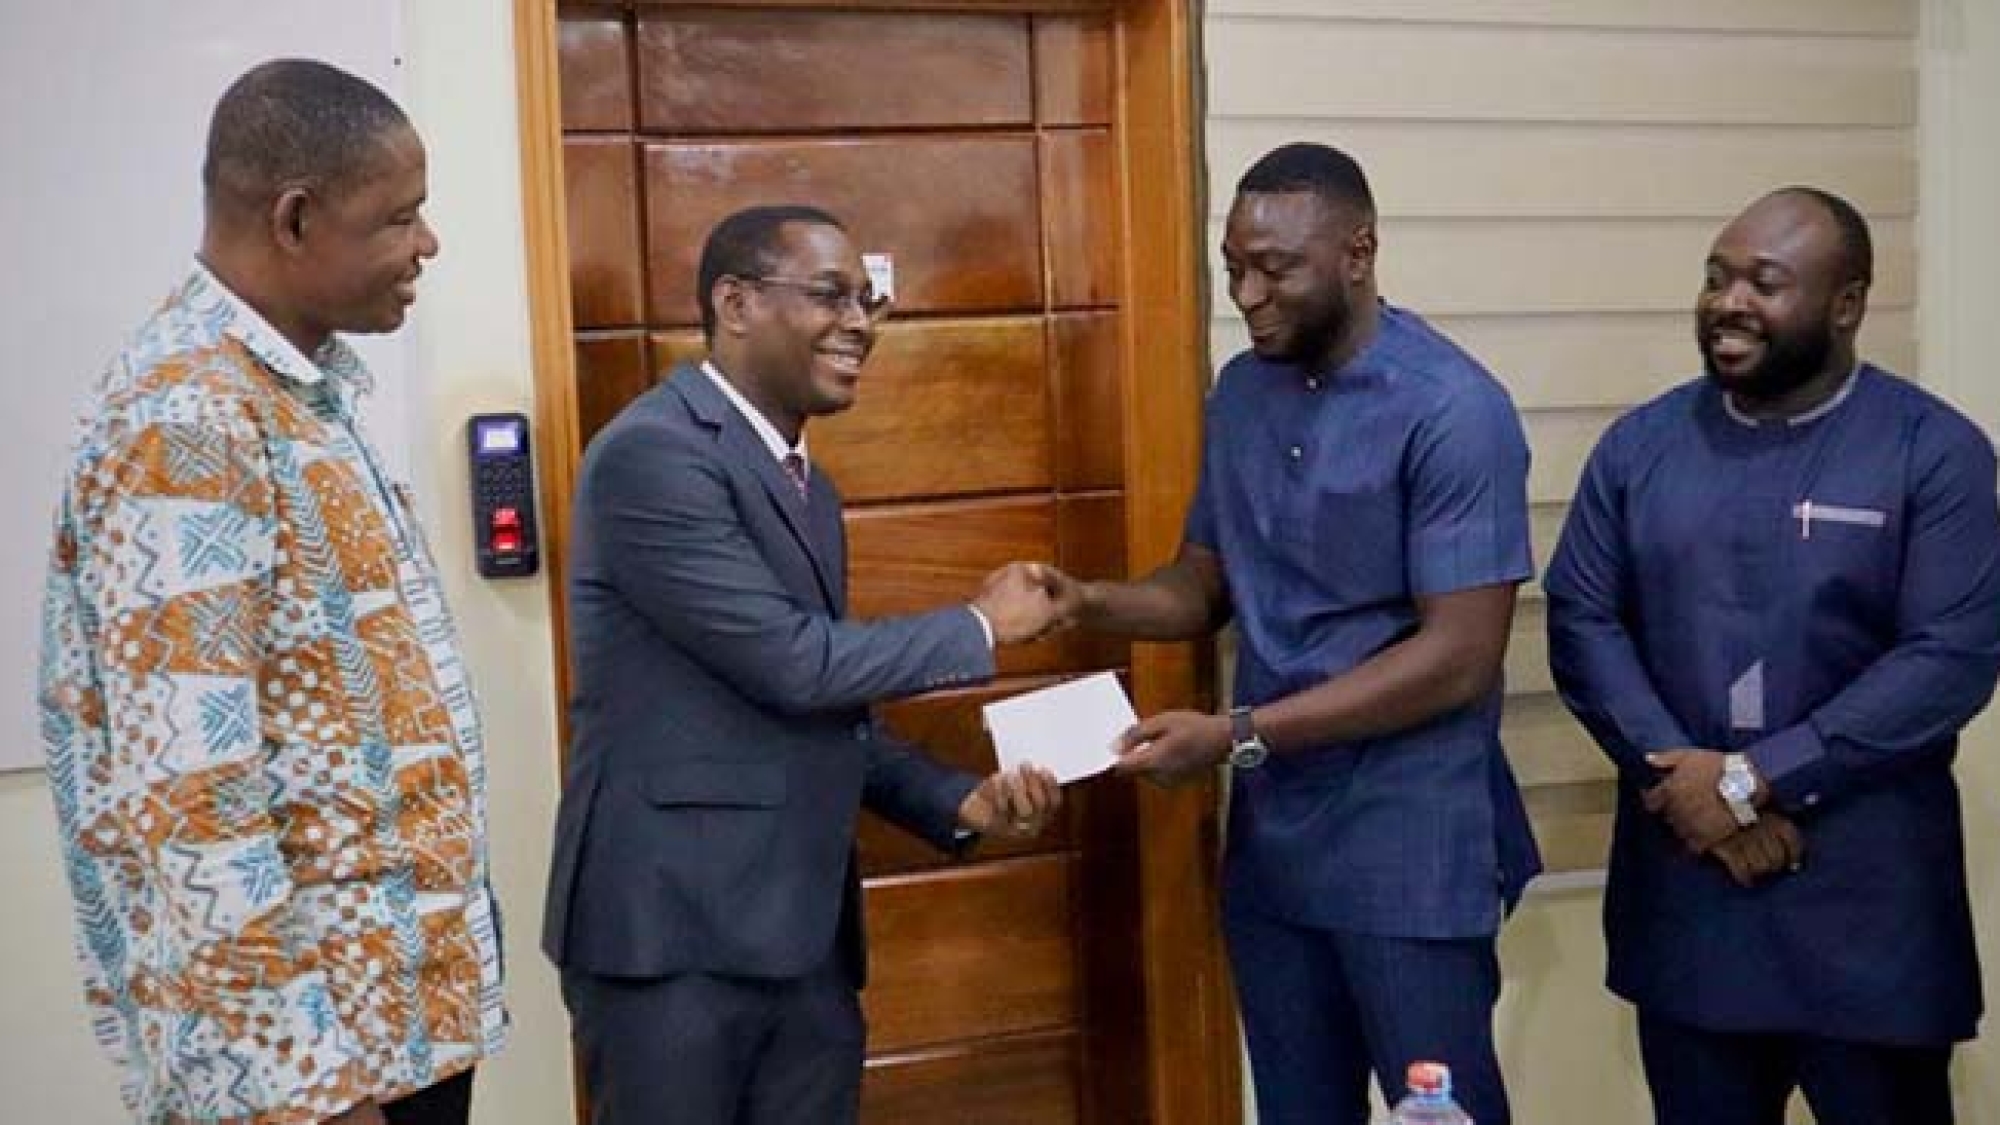 FeDems Group Supports Pentecost Hospital web